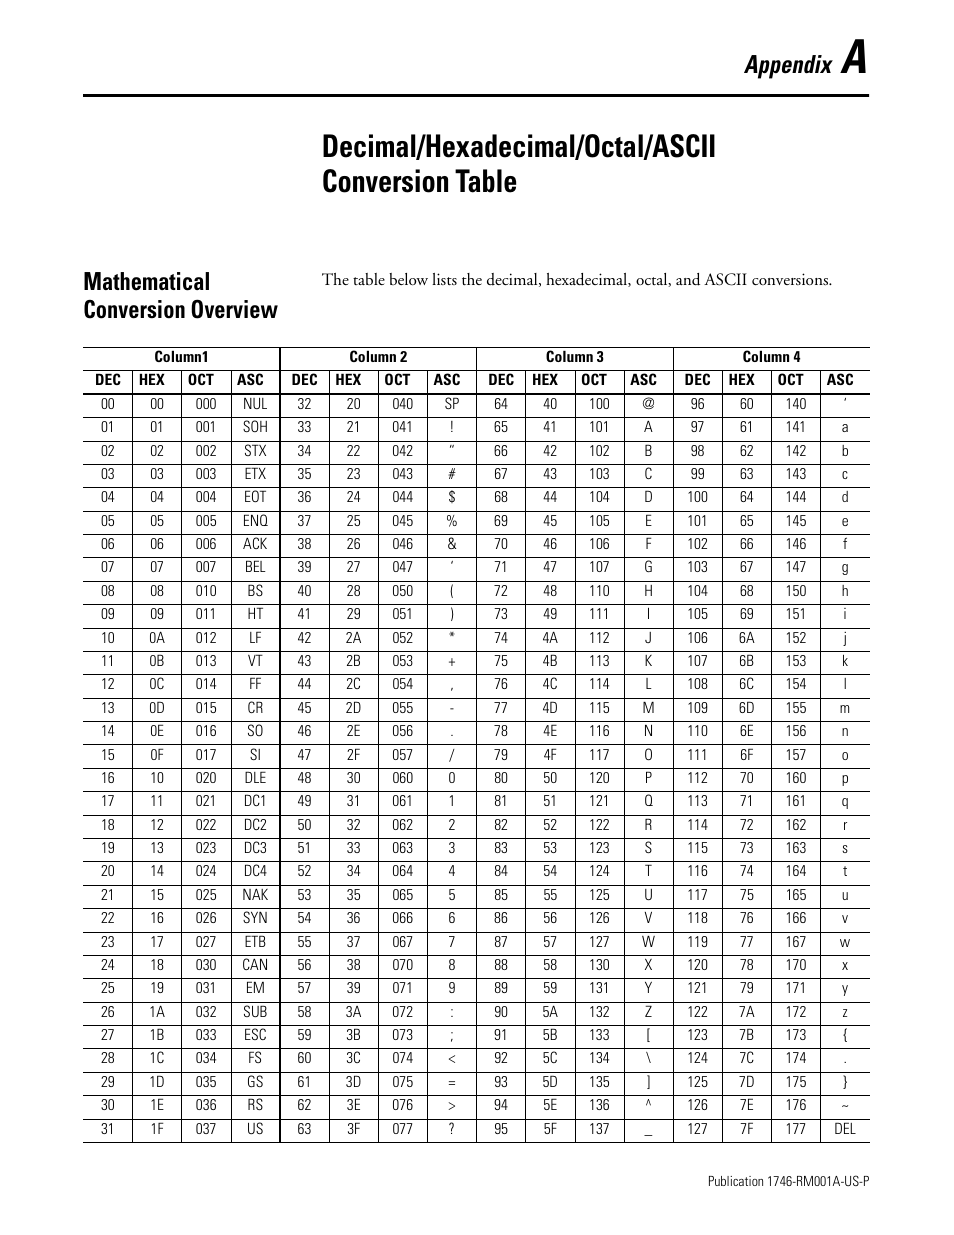 Decimal/hexadecimal/octal/ascii conversion table, Mathematical conversion  overview, Appendix a | Rockwell Automation 1746-BAS BASIC LANGUAGE User  Manual | Page 255 / 280 | Original mode